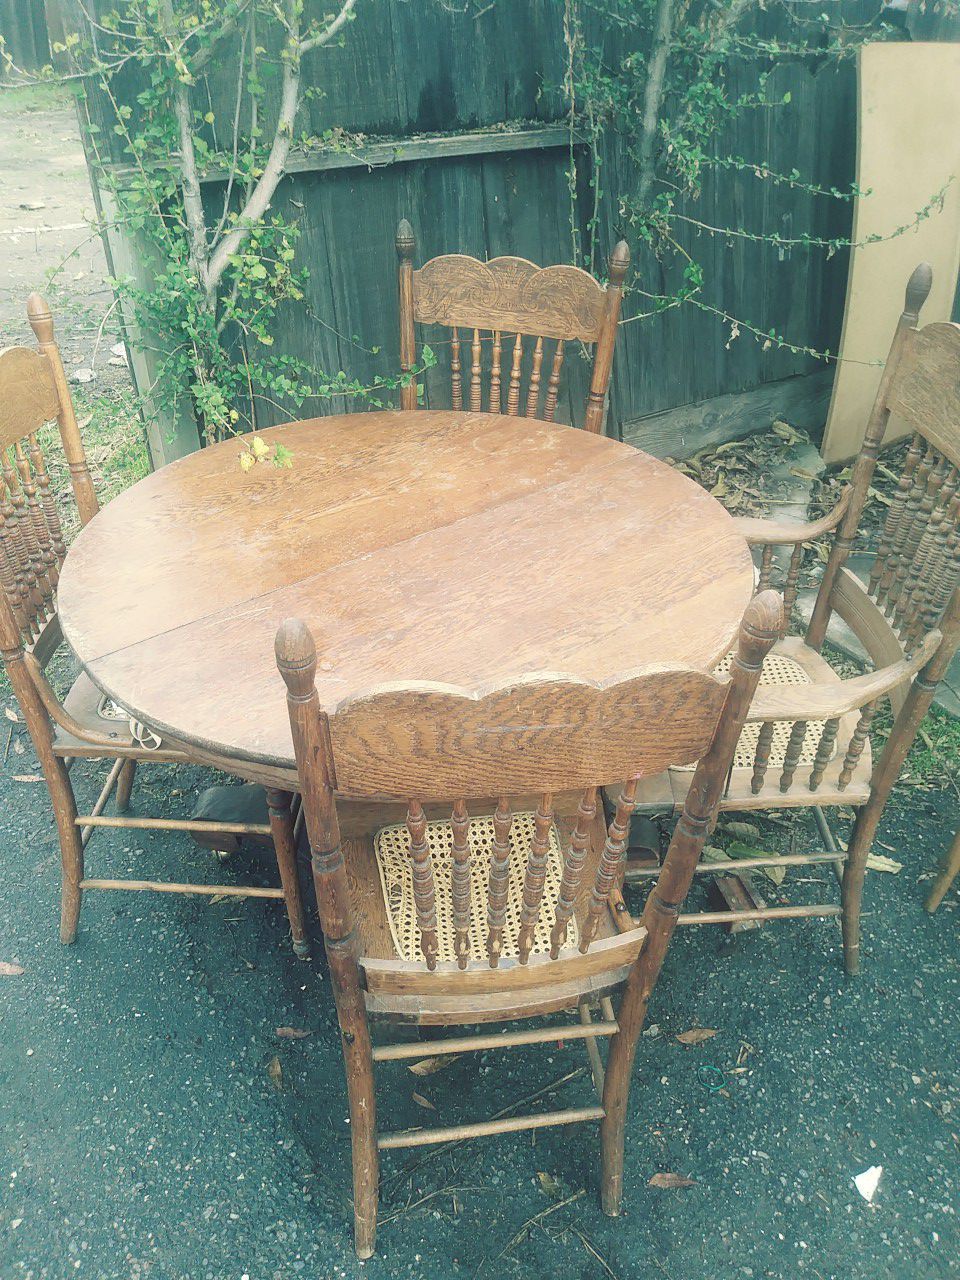 Free antique table and chairs